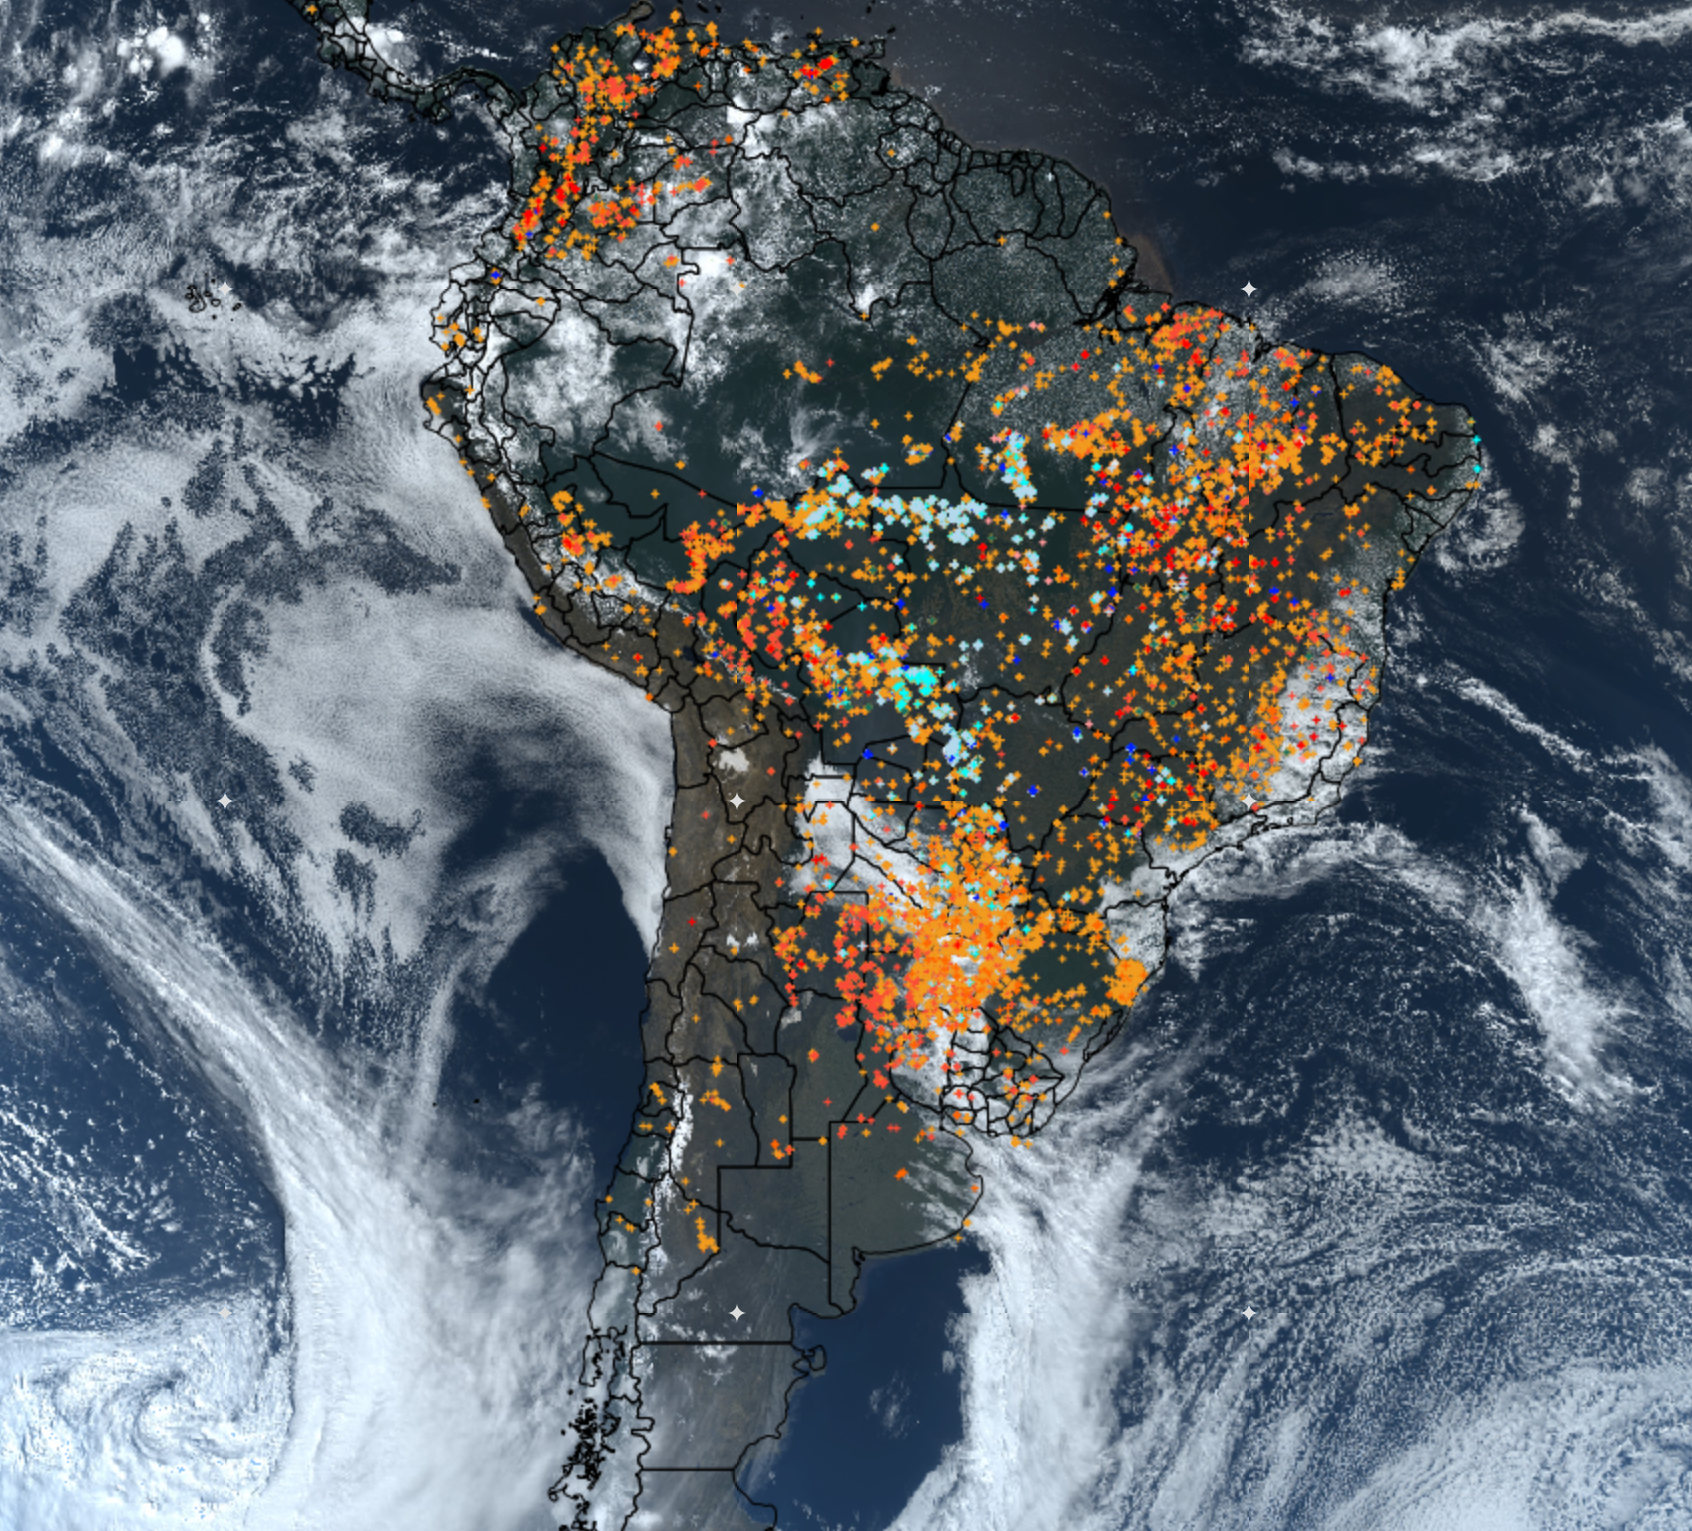 Satellite view of wildfires in South America on 21 August 2019. Wildfires raging in the Amazon rainforest hit a record number in 2019, with 72,843 fires detected in August by Brazil’s space research center INPE. Graphic: INPE